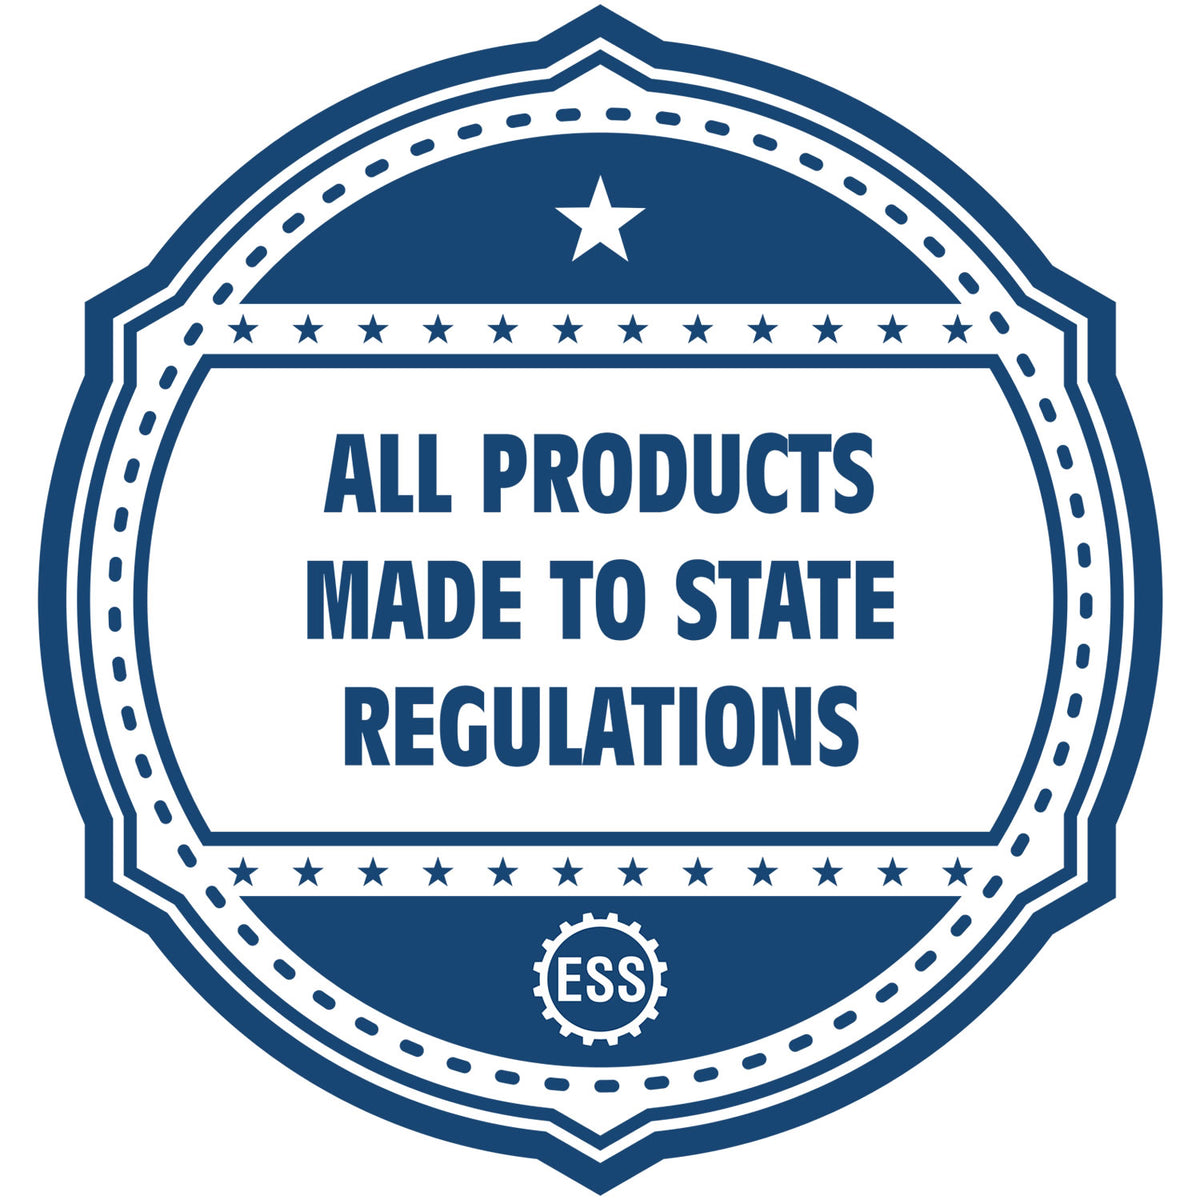 An icon or badge element for the Digital South Carolina Landscape Architect Stamp showing that this product is made in compliance with state regulations.